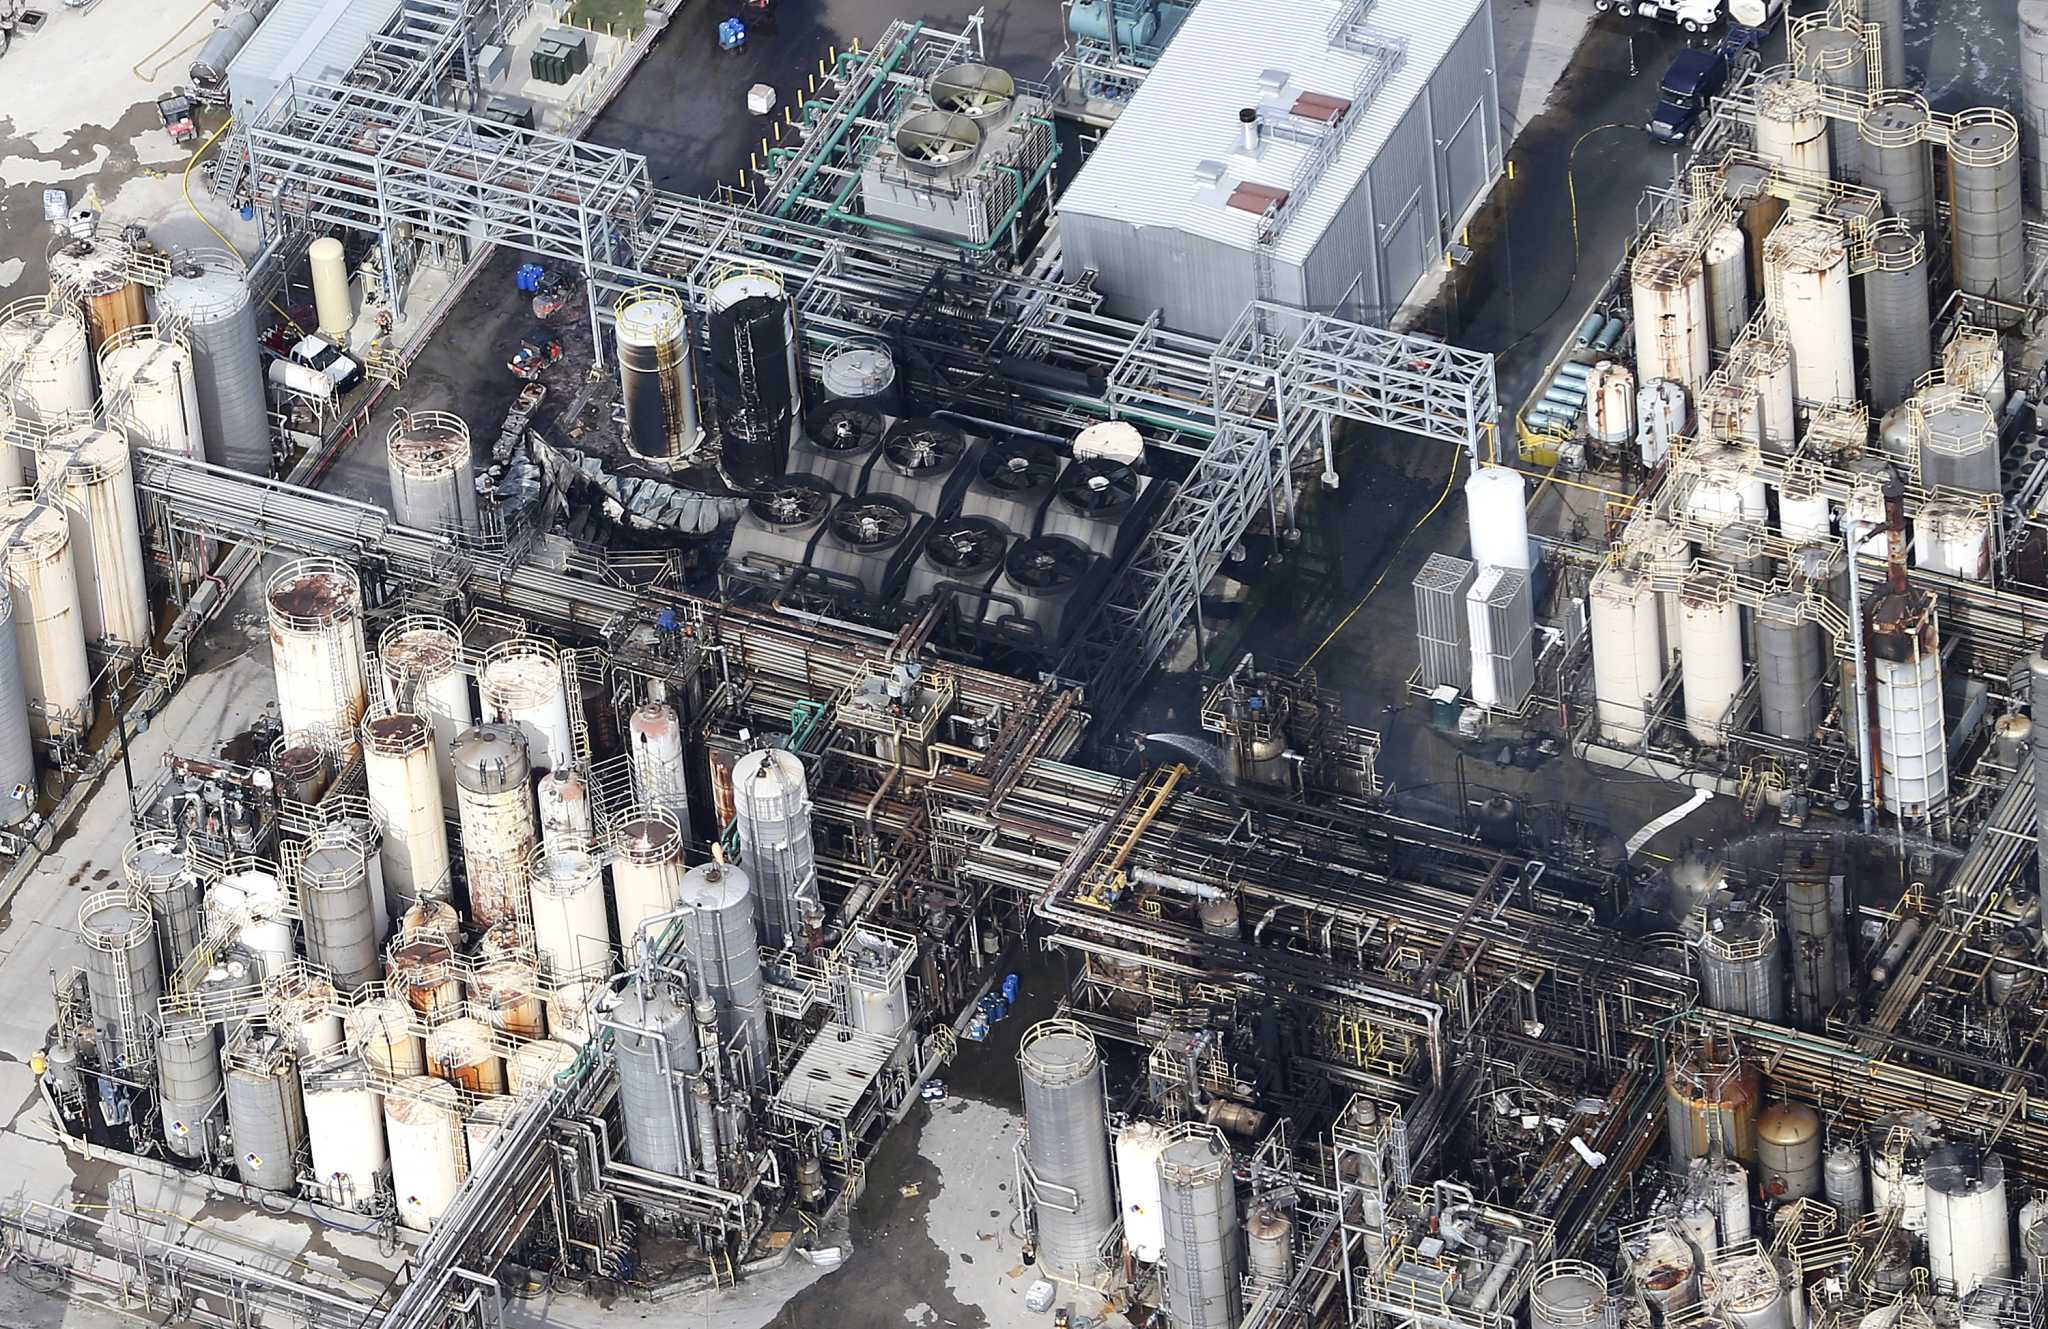 KMCO identifies worker killed in explosion at Crosby chemical plant - Houston Chronicle